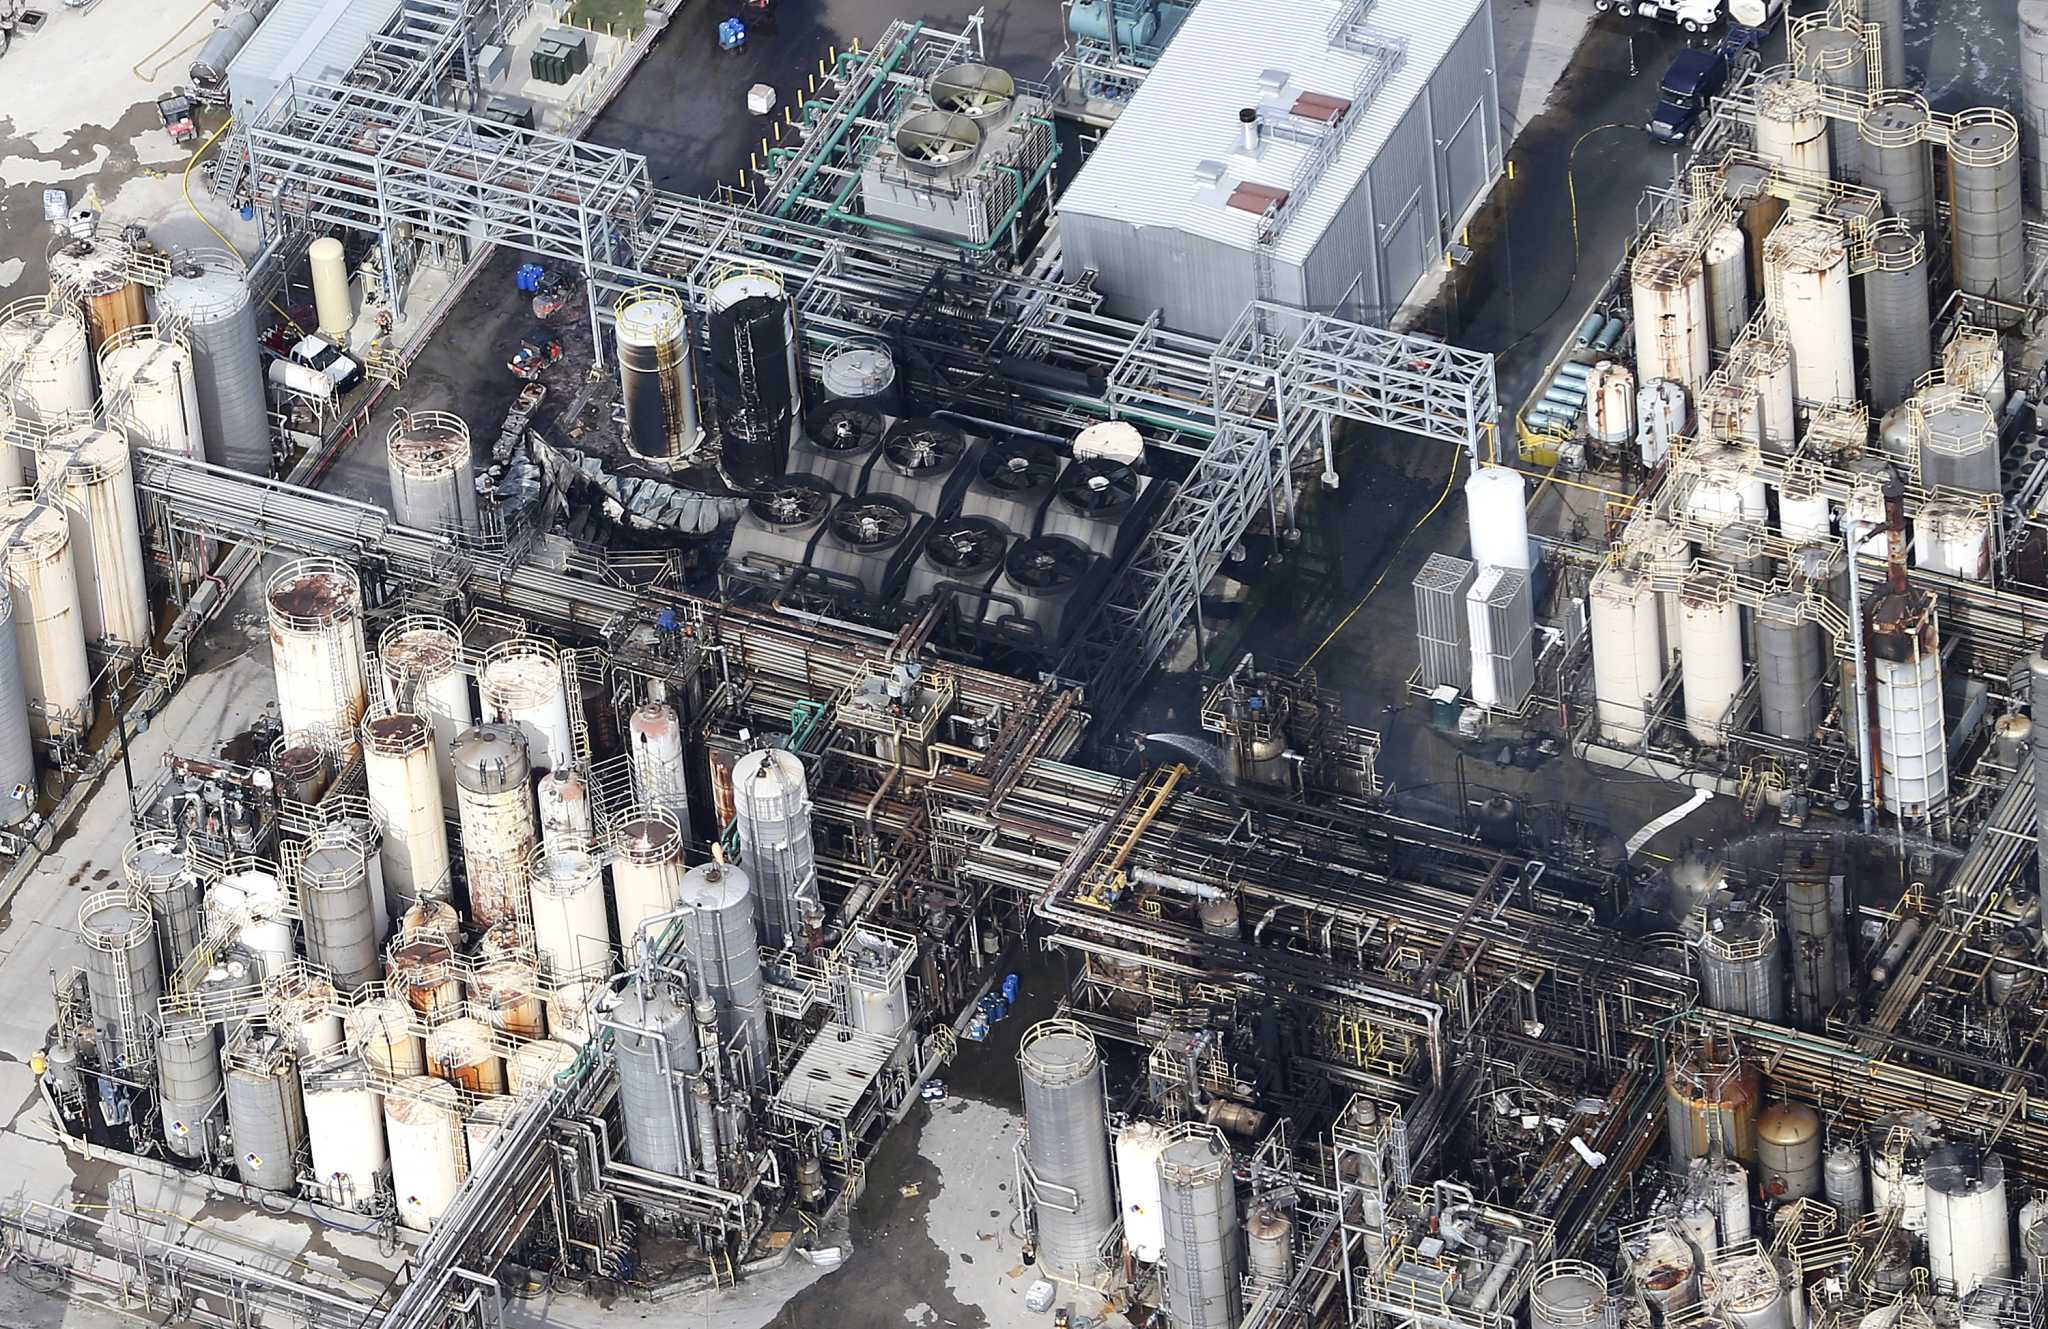 KMCO identifies worker killed in explosion at Crosby chemical plant - Houston Chronicle